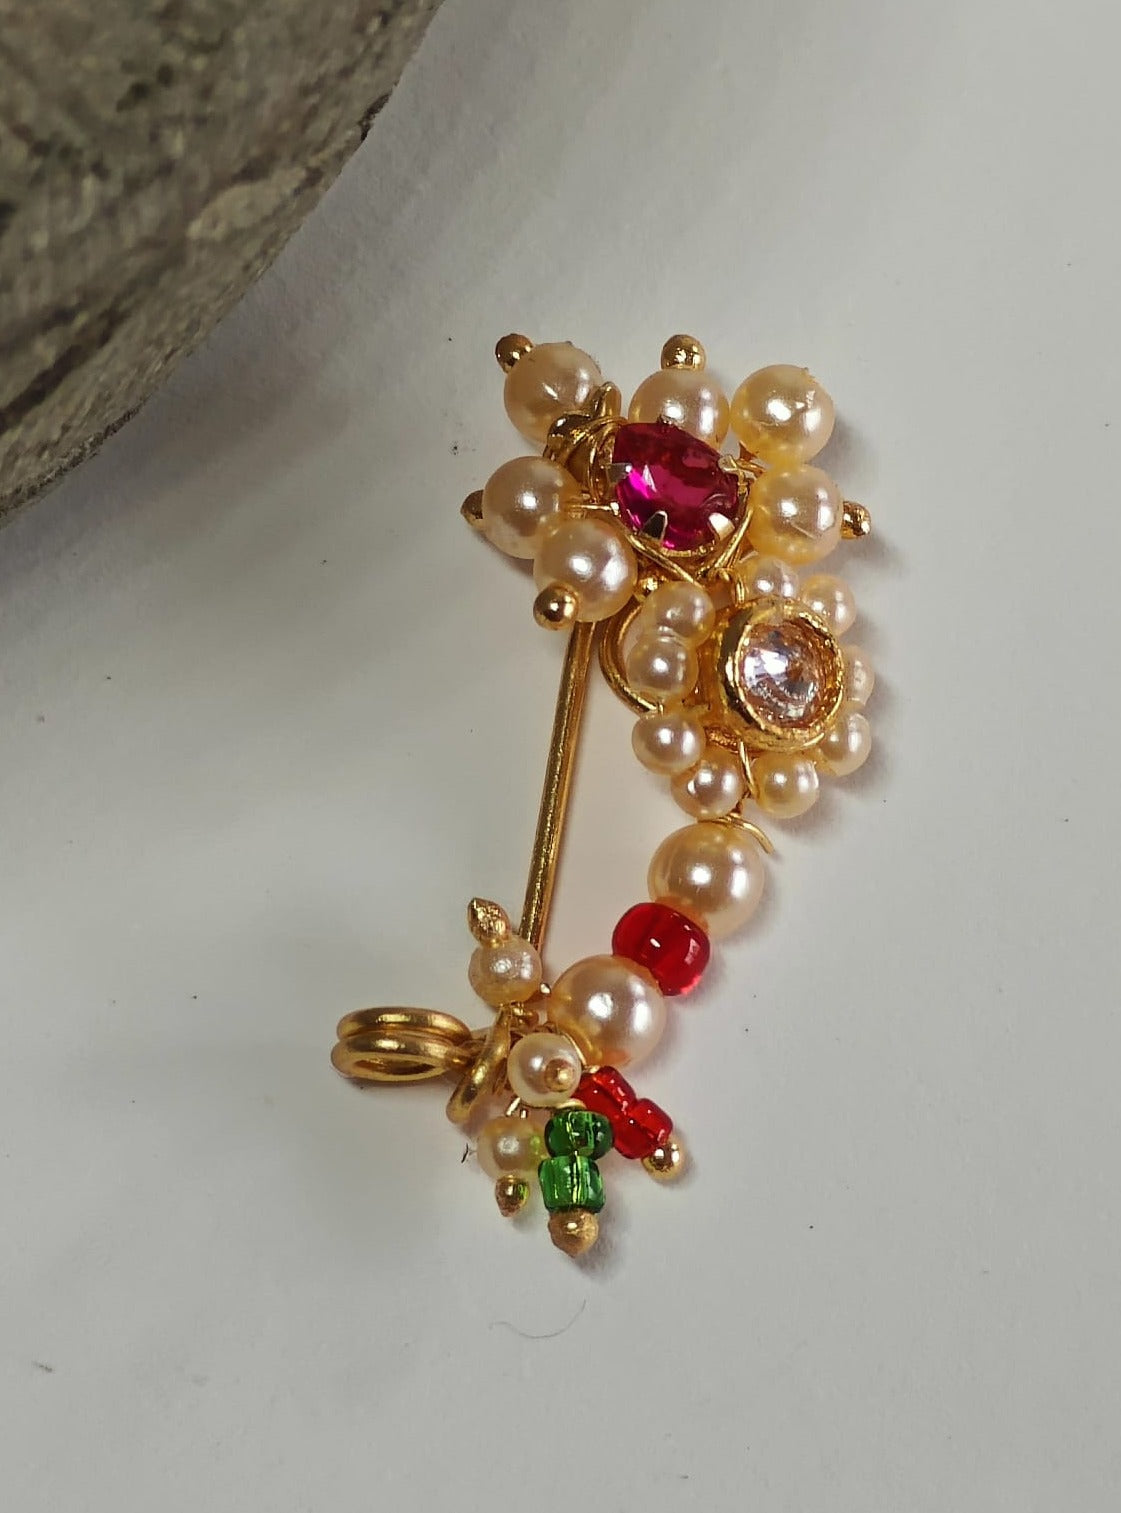 Gold Plated Marathi Mini Nath- Pink Accessories gifts fancy traditional ethnic trendy handmade accessories handcrafted matching assorted mix n match pearl multicolour metal golden nath nose pin nathani Marathi gold plated Maharashtrian accessory